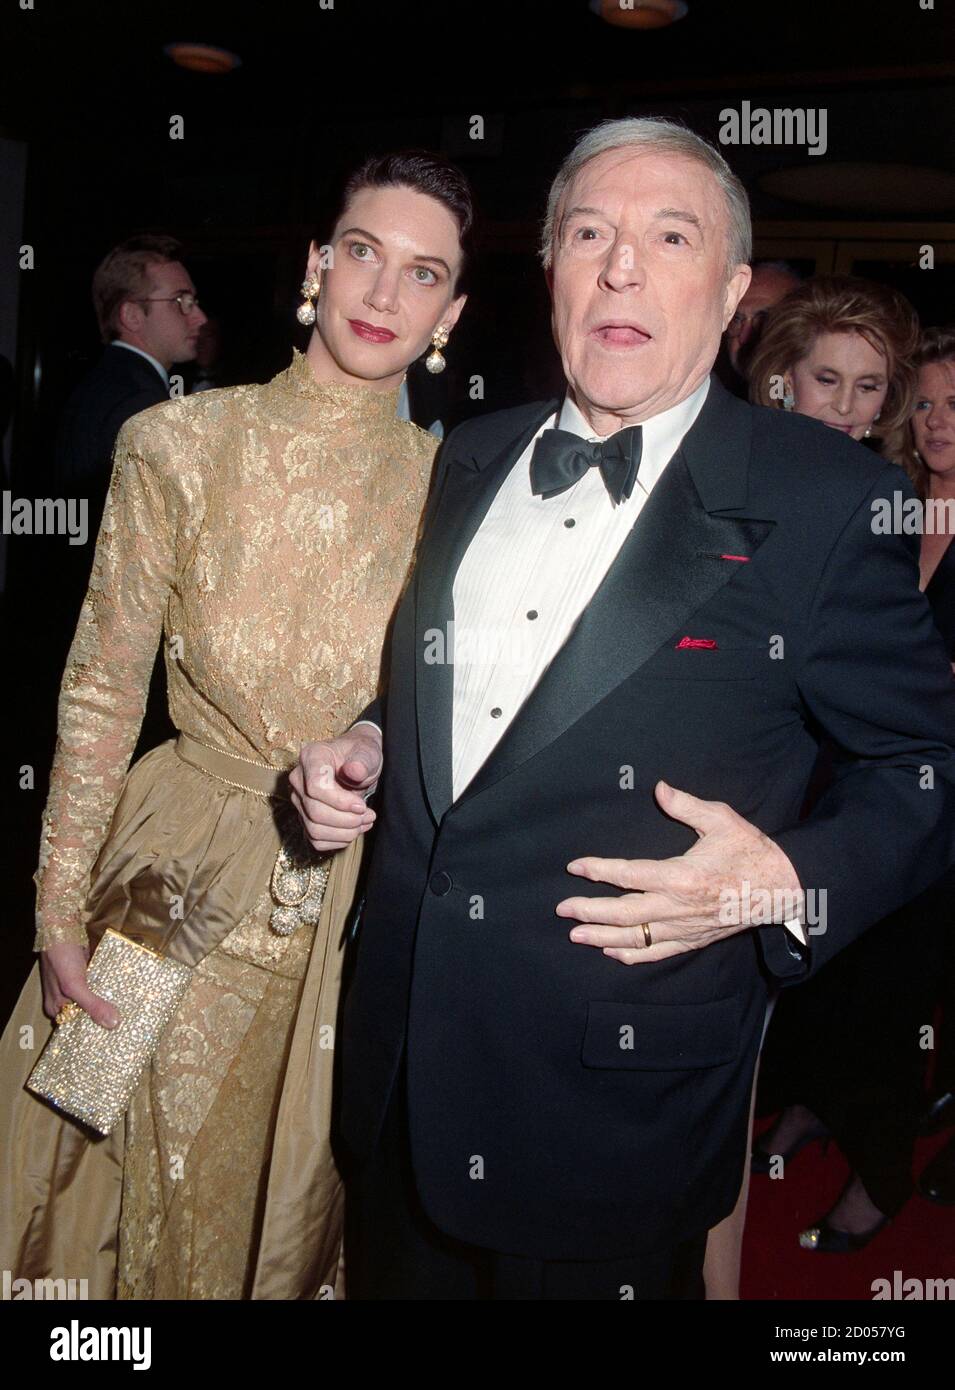 ARCHIVE: LOS ANGELES, CA. April 28, 1994: Actor Gene Kelly at the premiere of 'That's Entertainment! III' in Los Angeles. File photo © Paul Smith/Featureflash Stock Photo